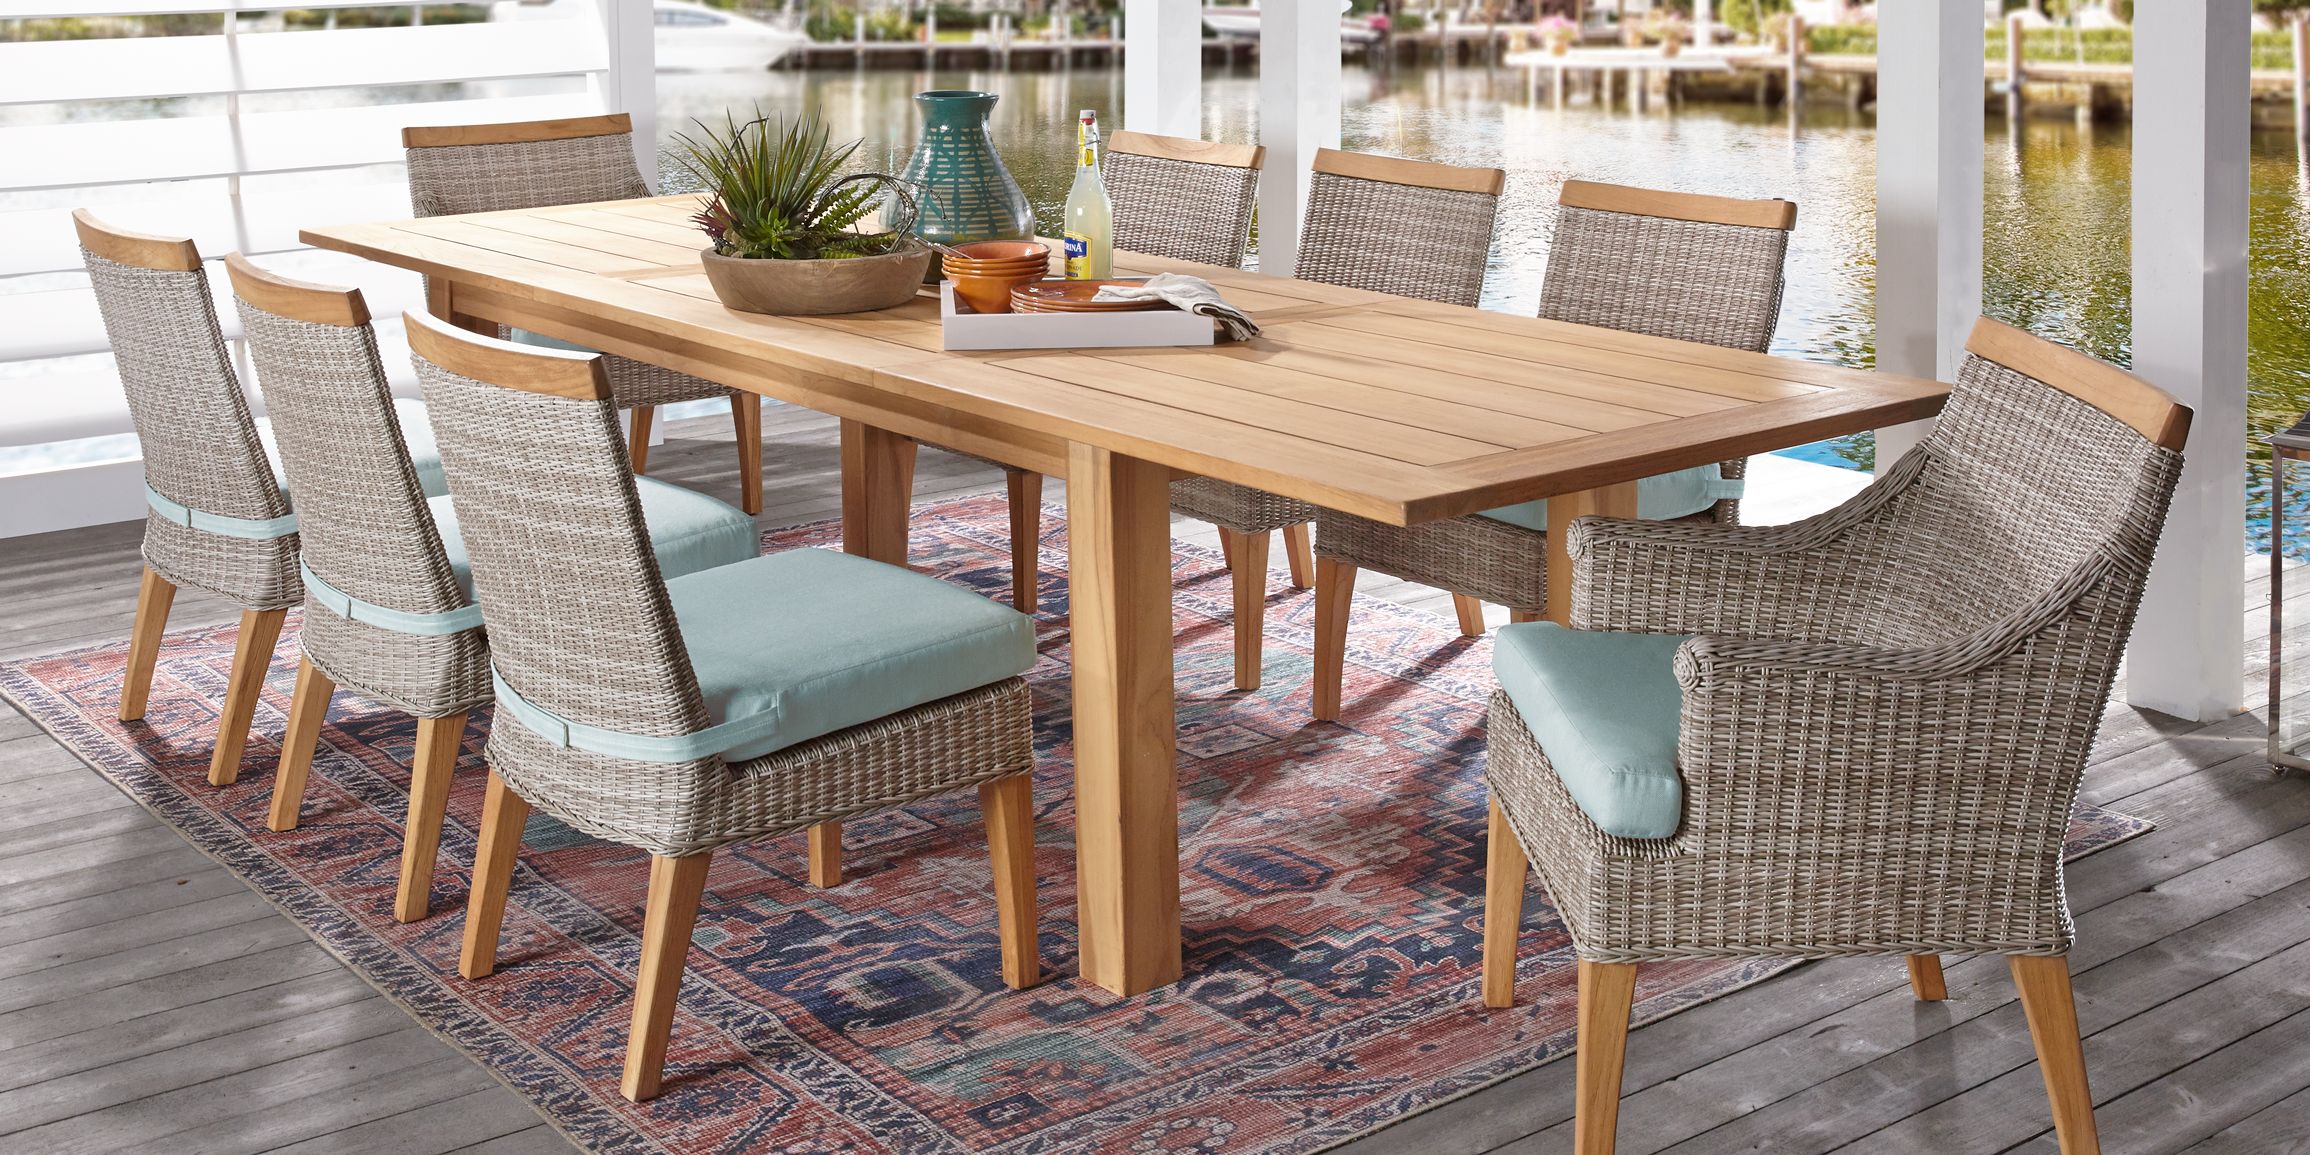 Outdoor 9 Piece Patio Dining Sets, Wooden Outdoor Dining Set With Cushions